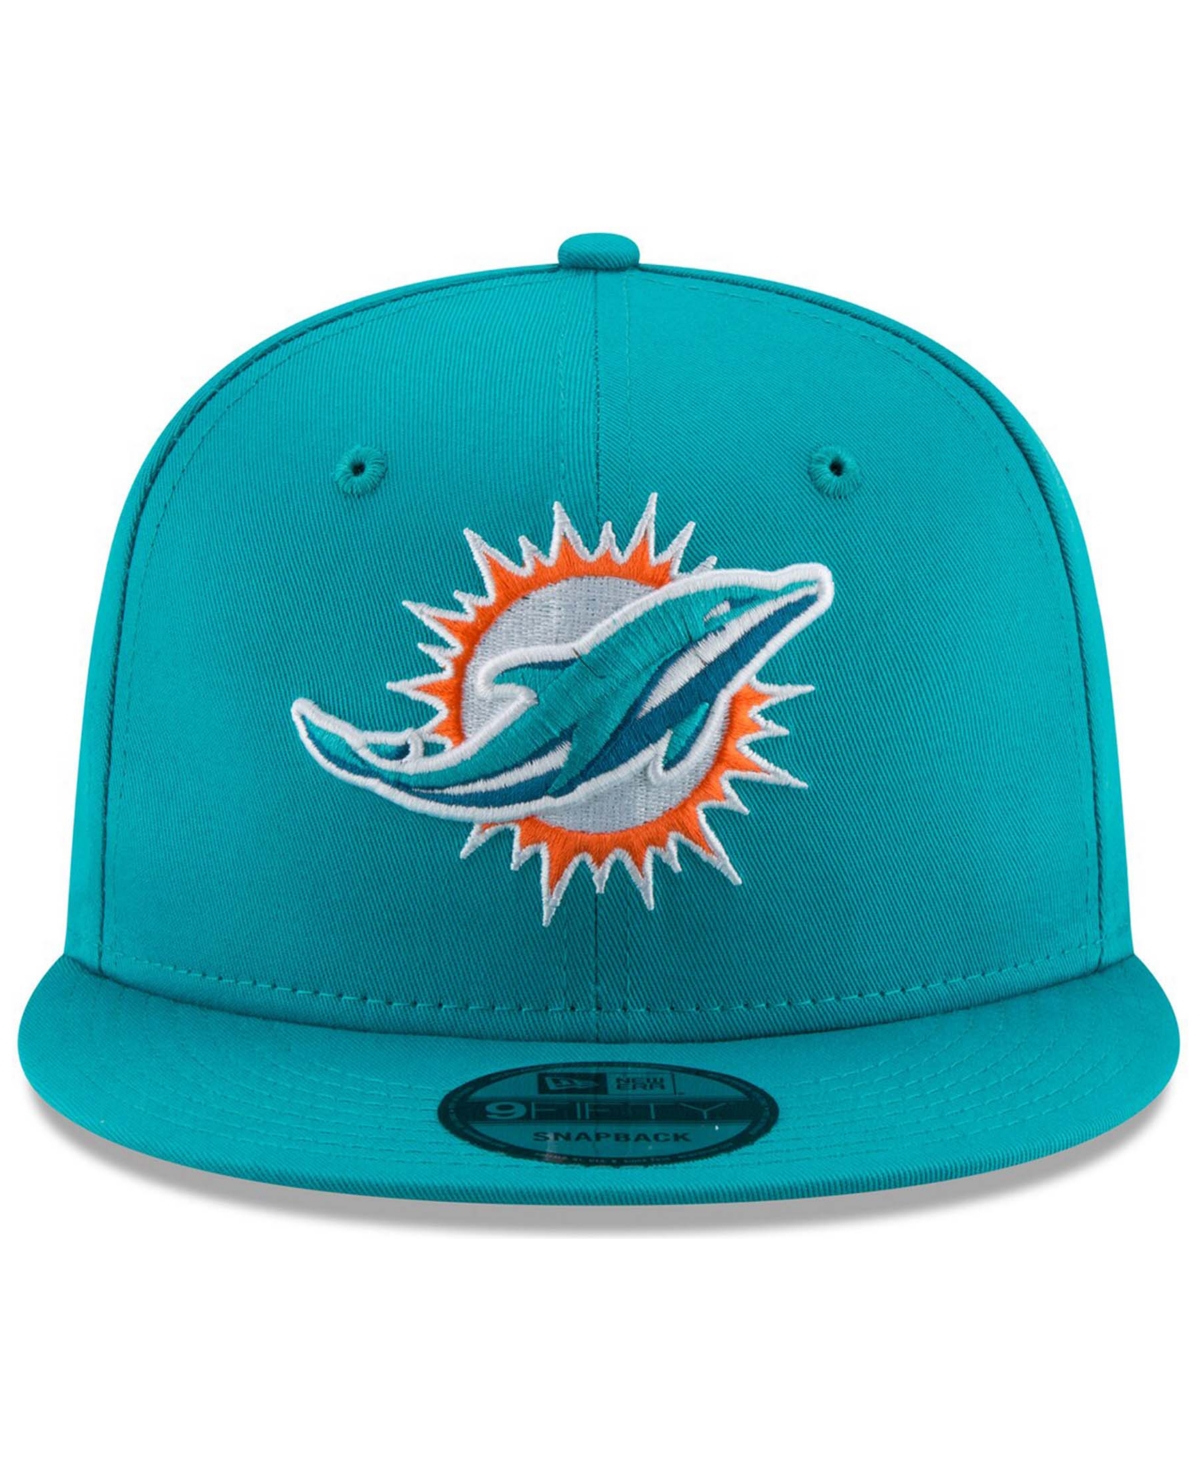 Shop New Era Men's Miami Dolphins Basic 9fifty Adjustable Snapback Cap In Turquoise